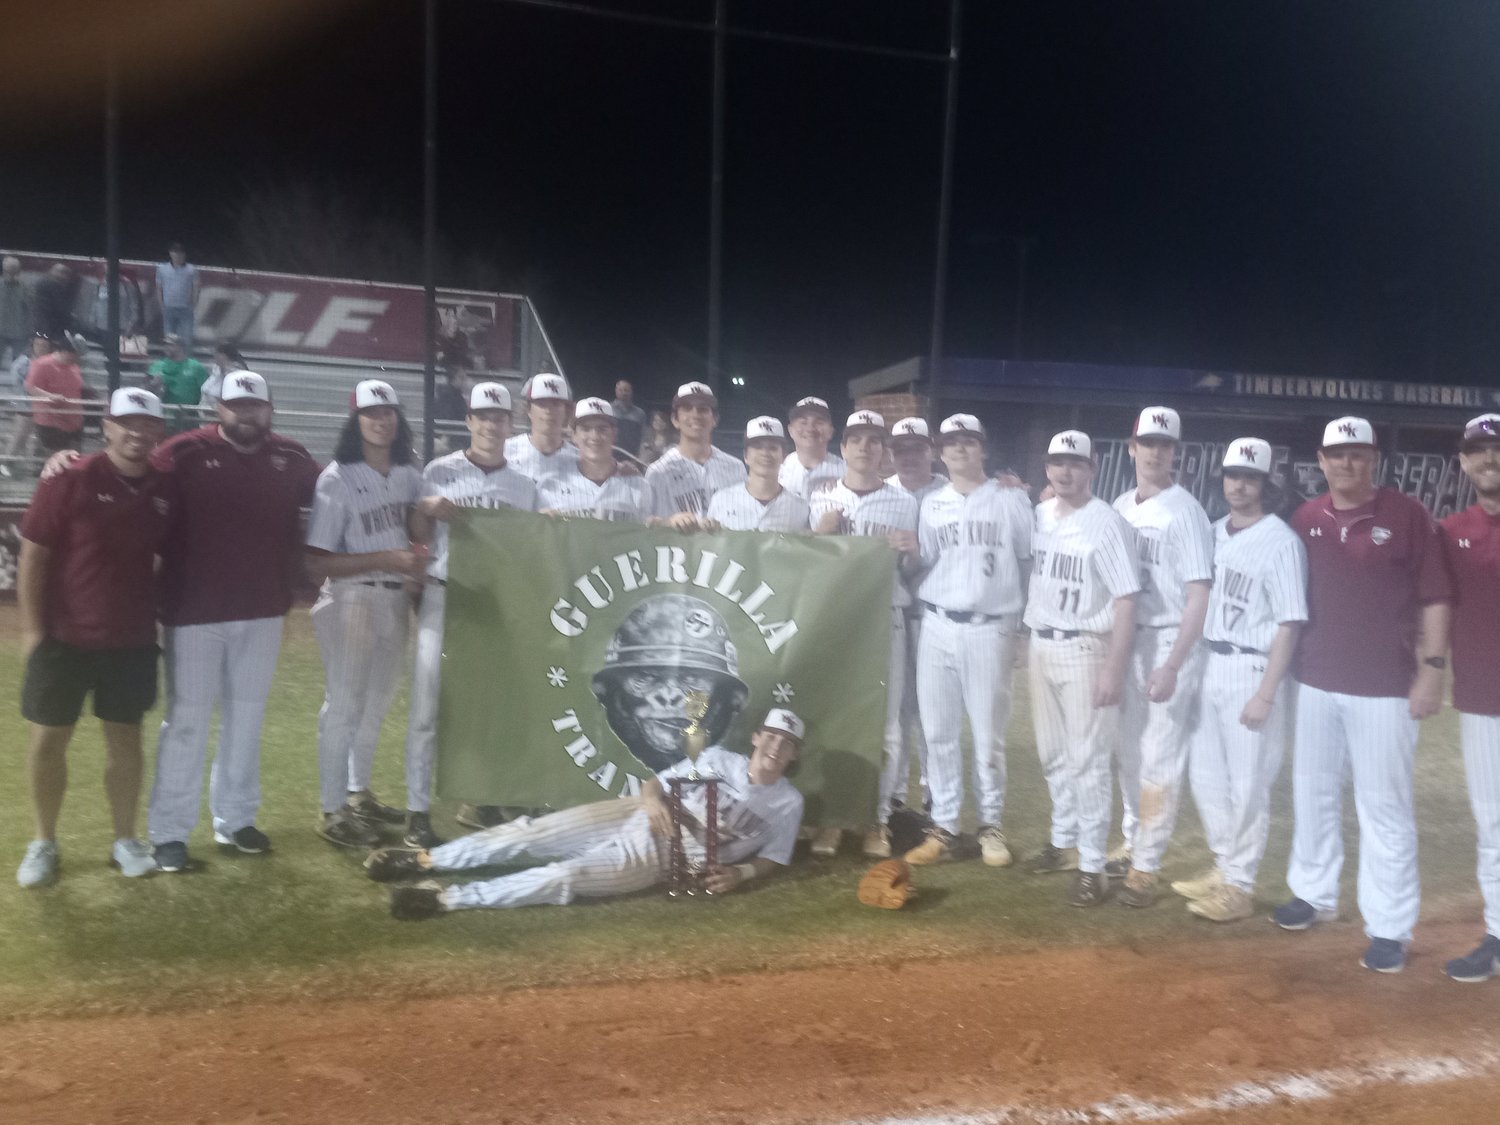 The White Knoll baseball team after winning the 13th annual Red Bank Invitational.